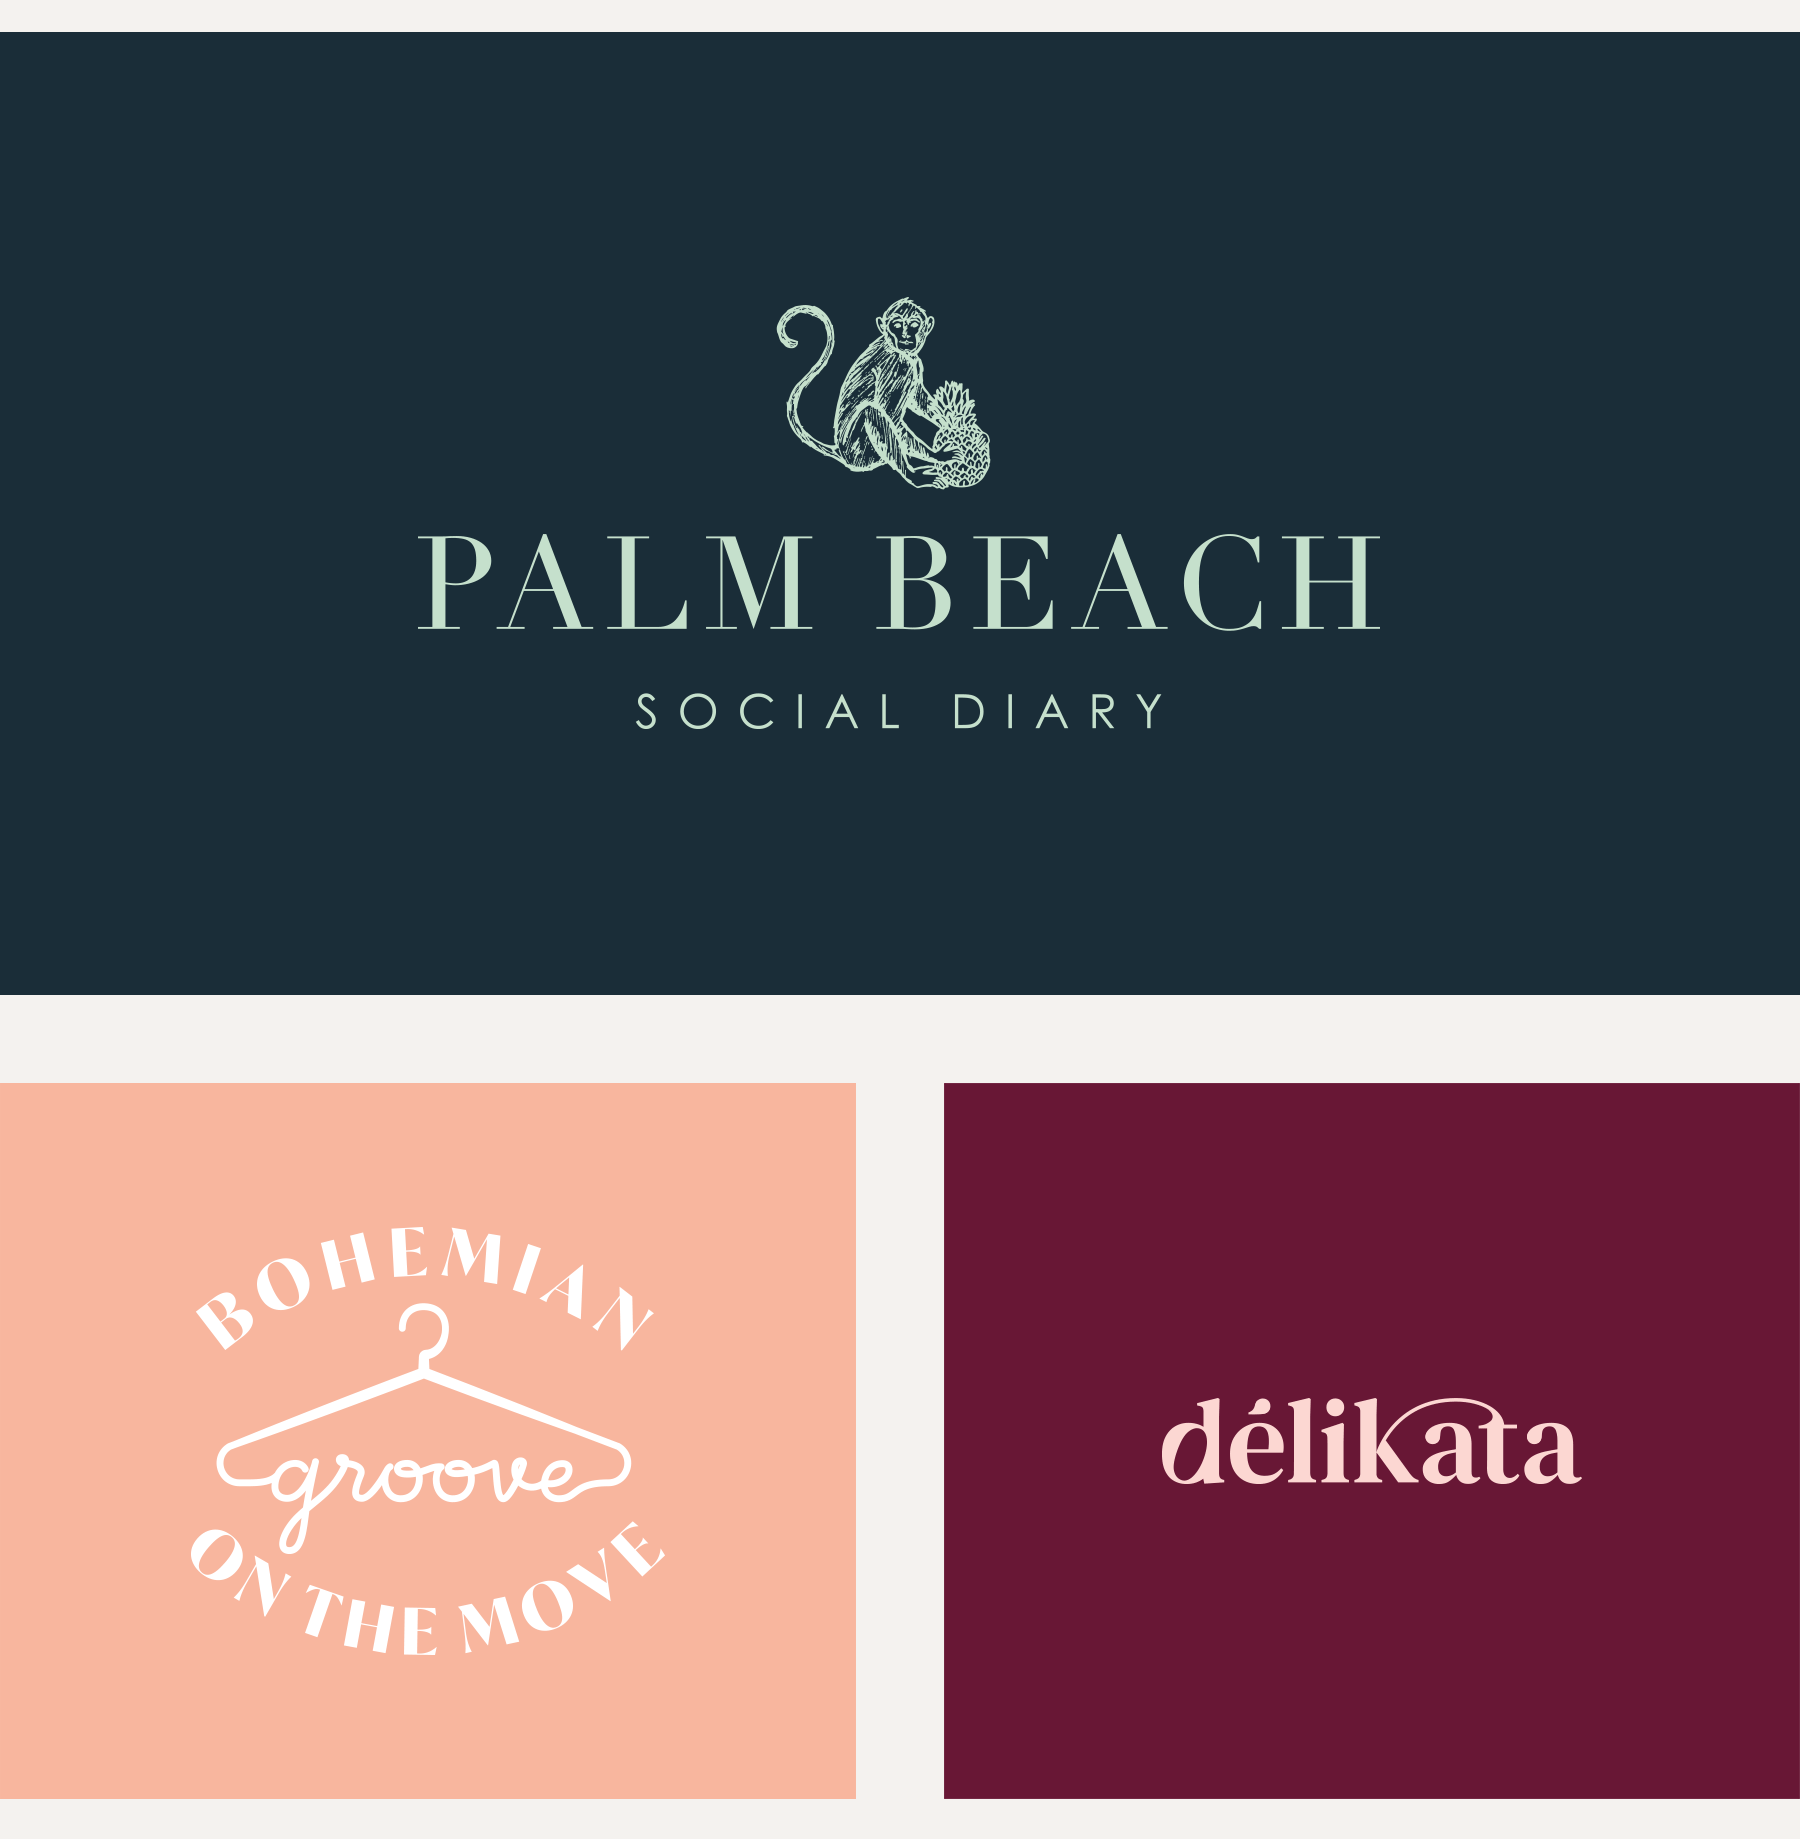 Animated logo variations of Palm Beach Social Diary with an illustrated monkey, Bohemian Groove on the Move, and Delikata explorations.